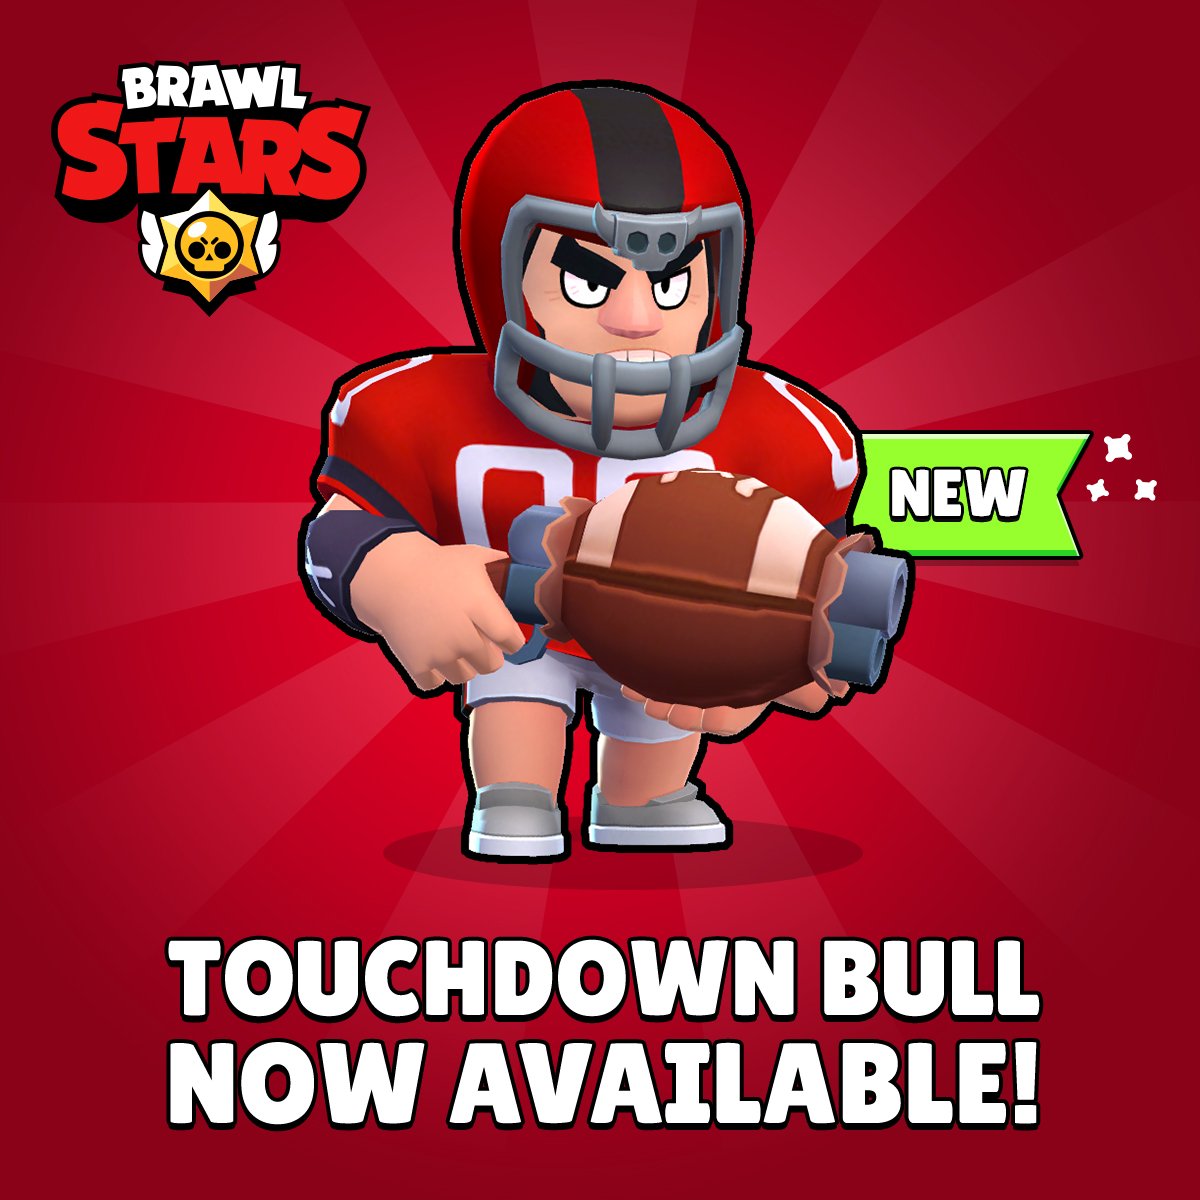 Brawl Stars On Twitter Touchdown Bull Is Available Now Who Are You Rooting For This Weekend - brawl stars characters bul